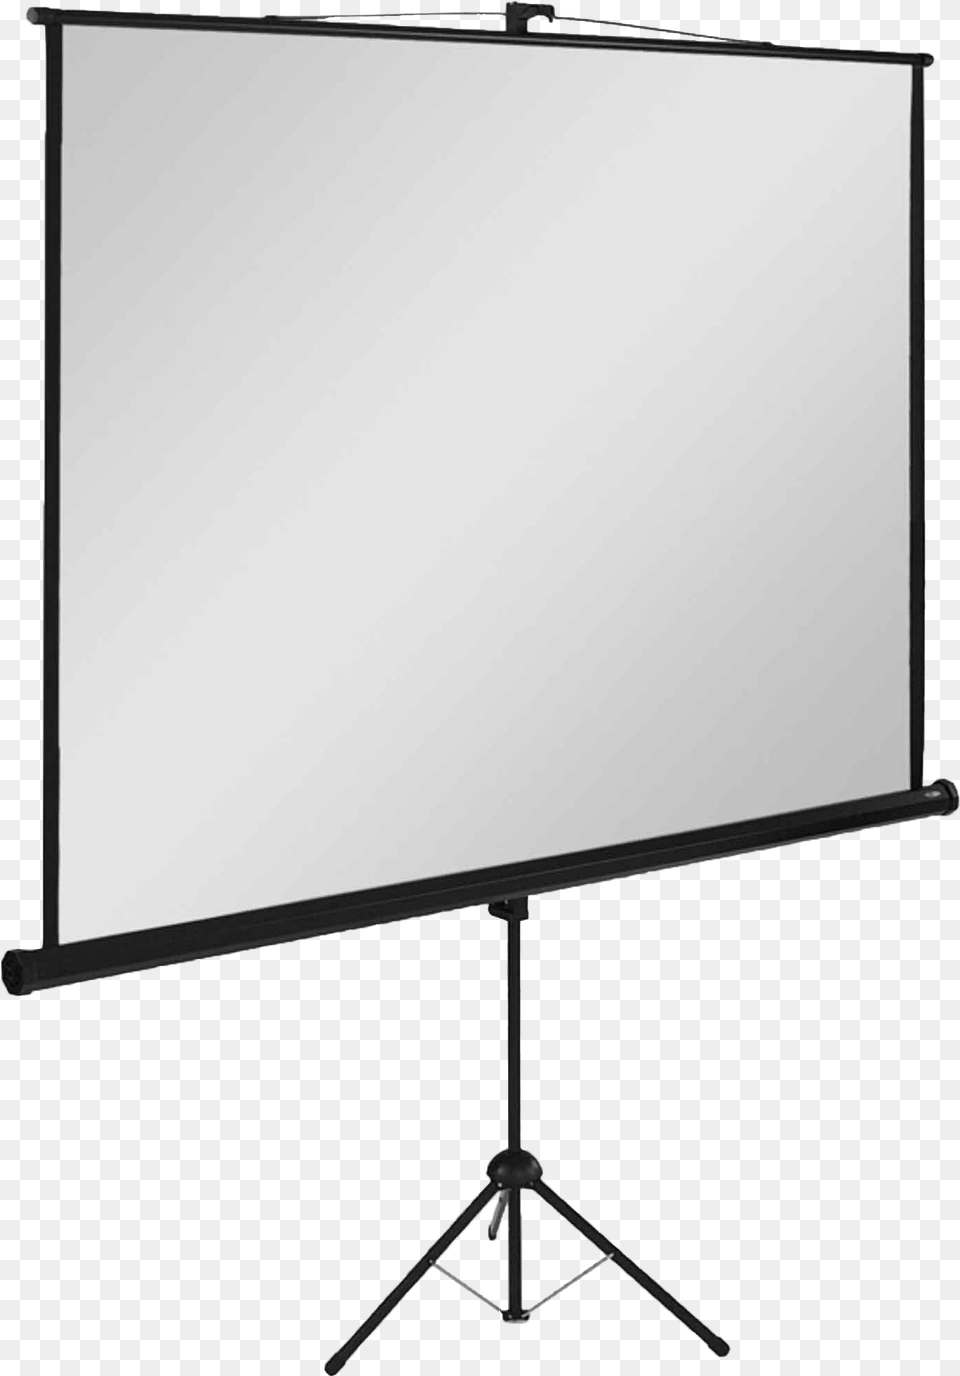 Projector Screen, Electronics, Projection Screen, White Board Free Transparent Png